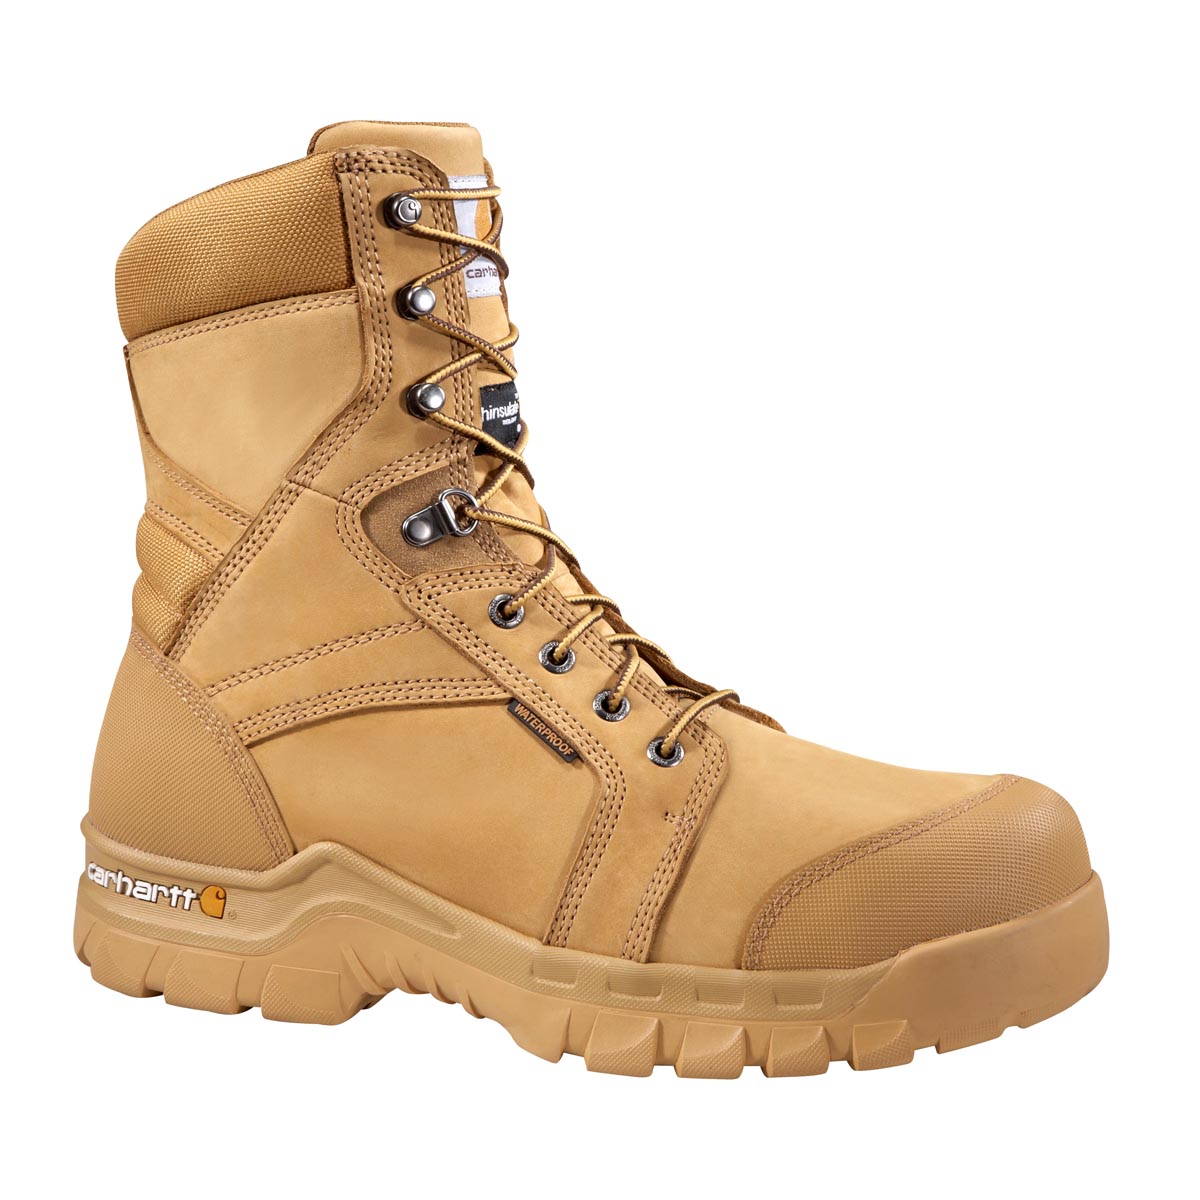 Carhartt Mens 8 Inch Wheat Rugged Flex Waterproof Insulated Work Boot Non Safety Toe